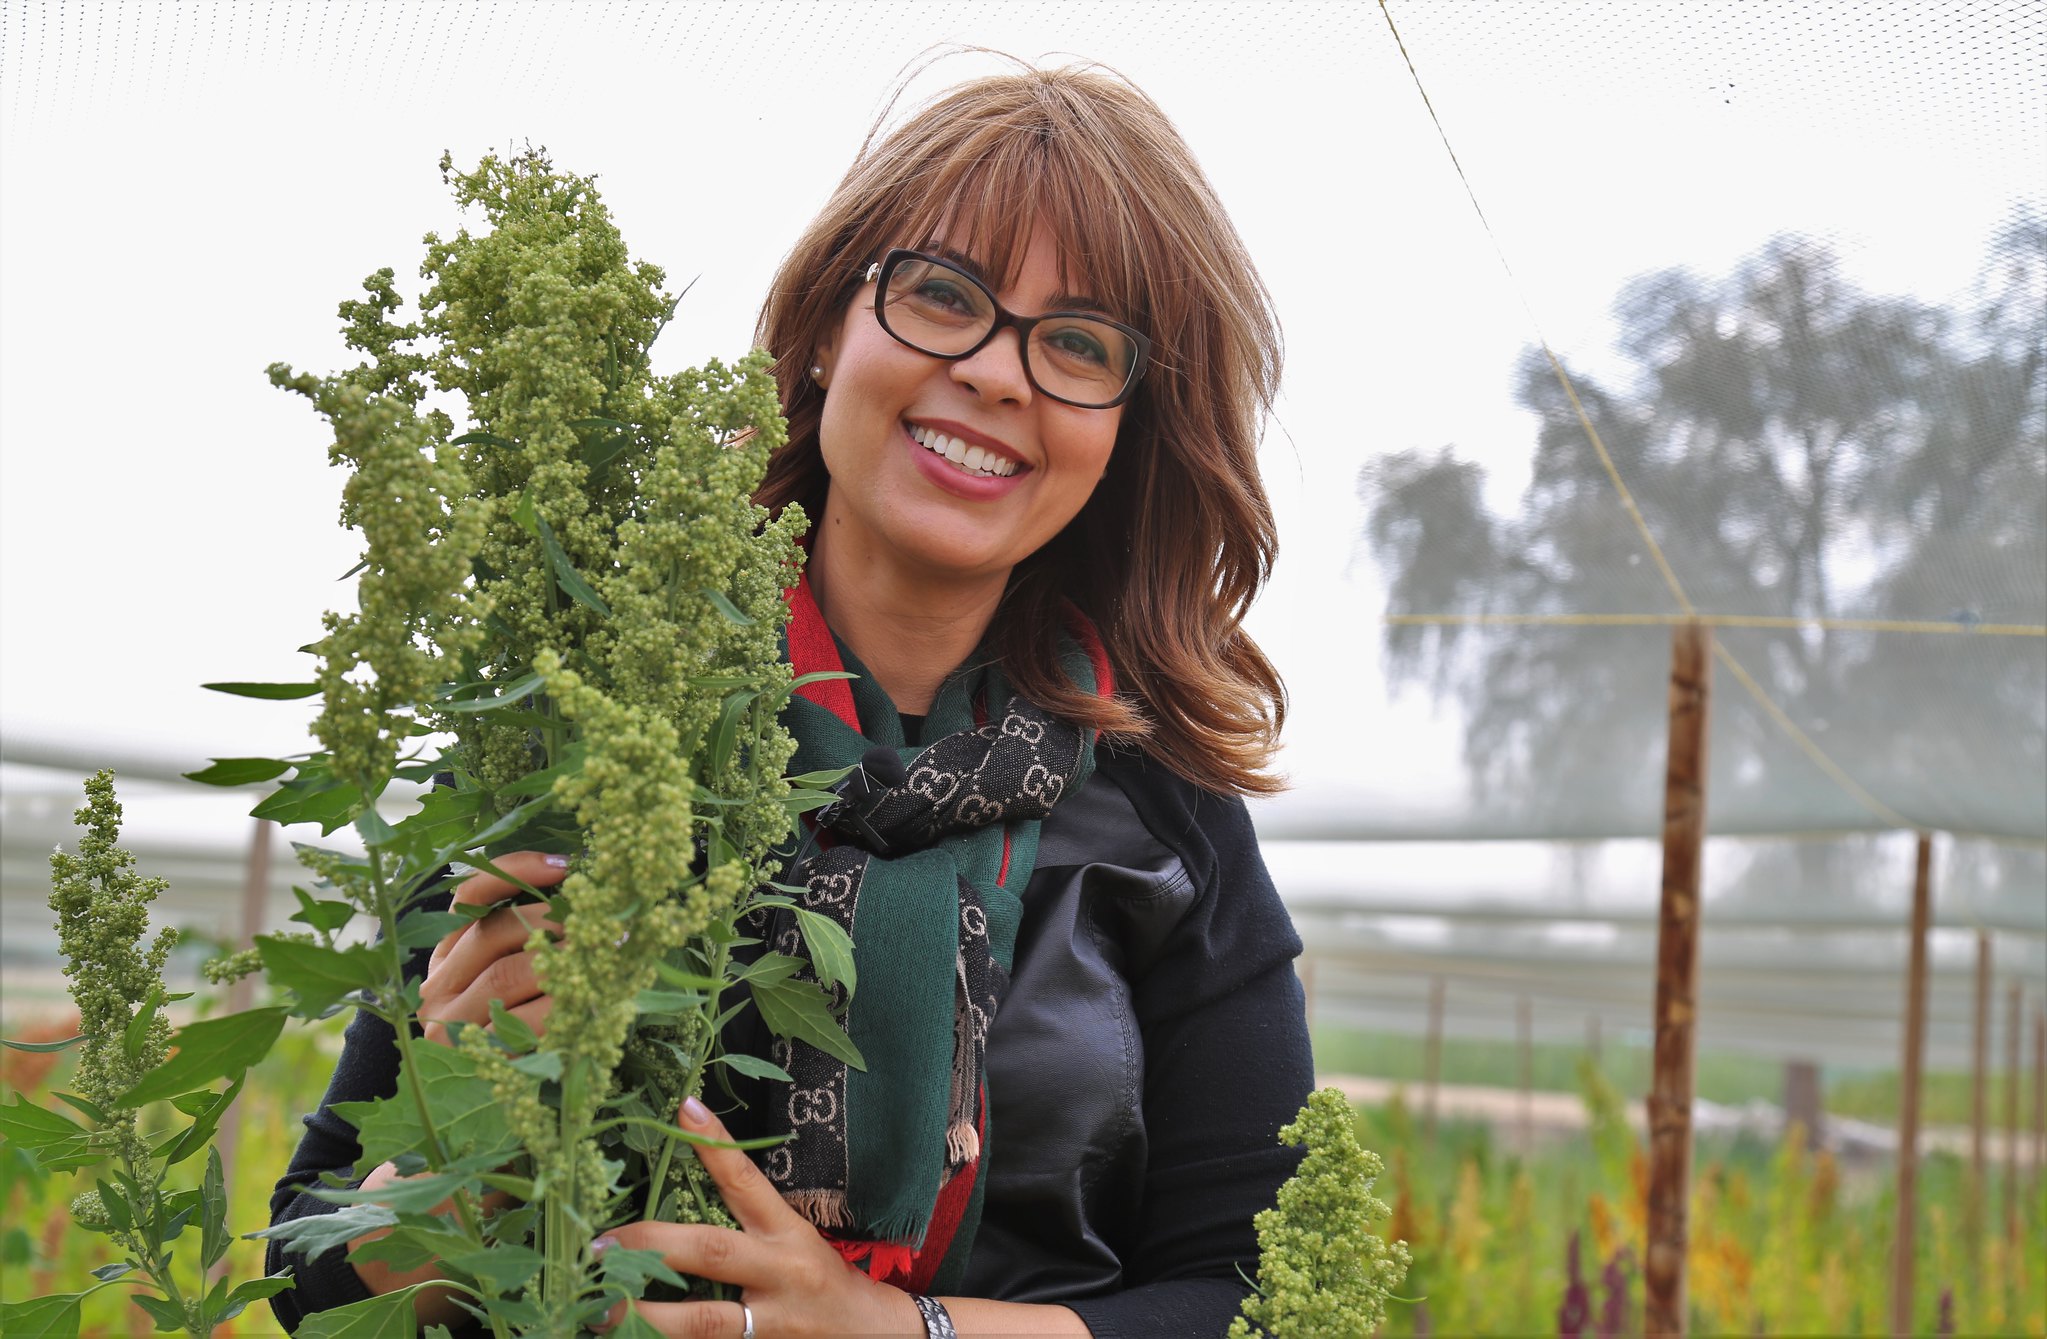 Ismahane Elouafi, the first chief scientist of the Food and Agriculture Organization (FAO) of the United Nations, has nearly two decades of experience in agricultural research and development and is internationally known for her work on promoting neglected and underutilized crops, use of non-fresh water in agriculture, and empowerment of women in science.